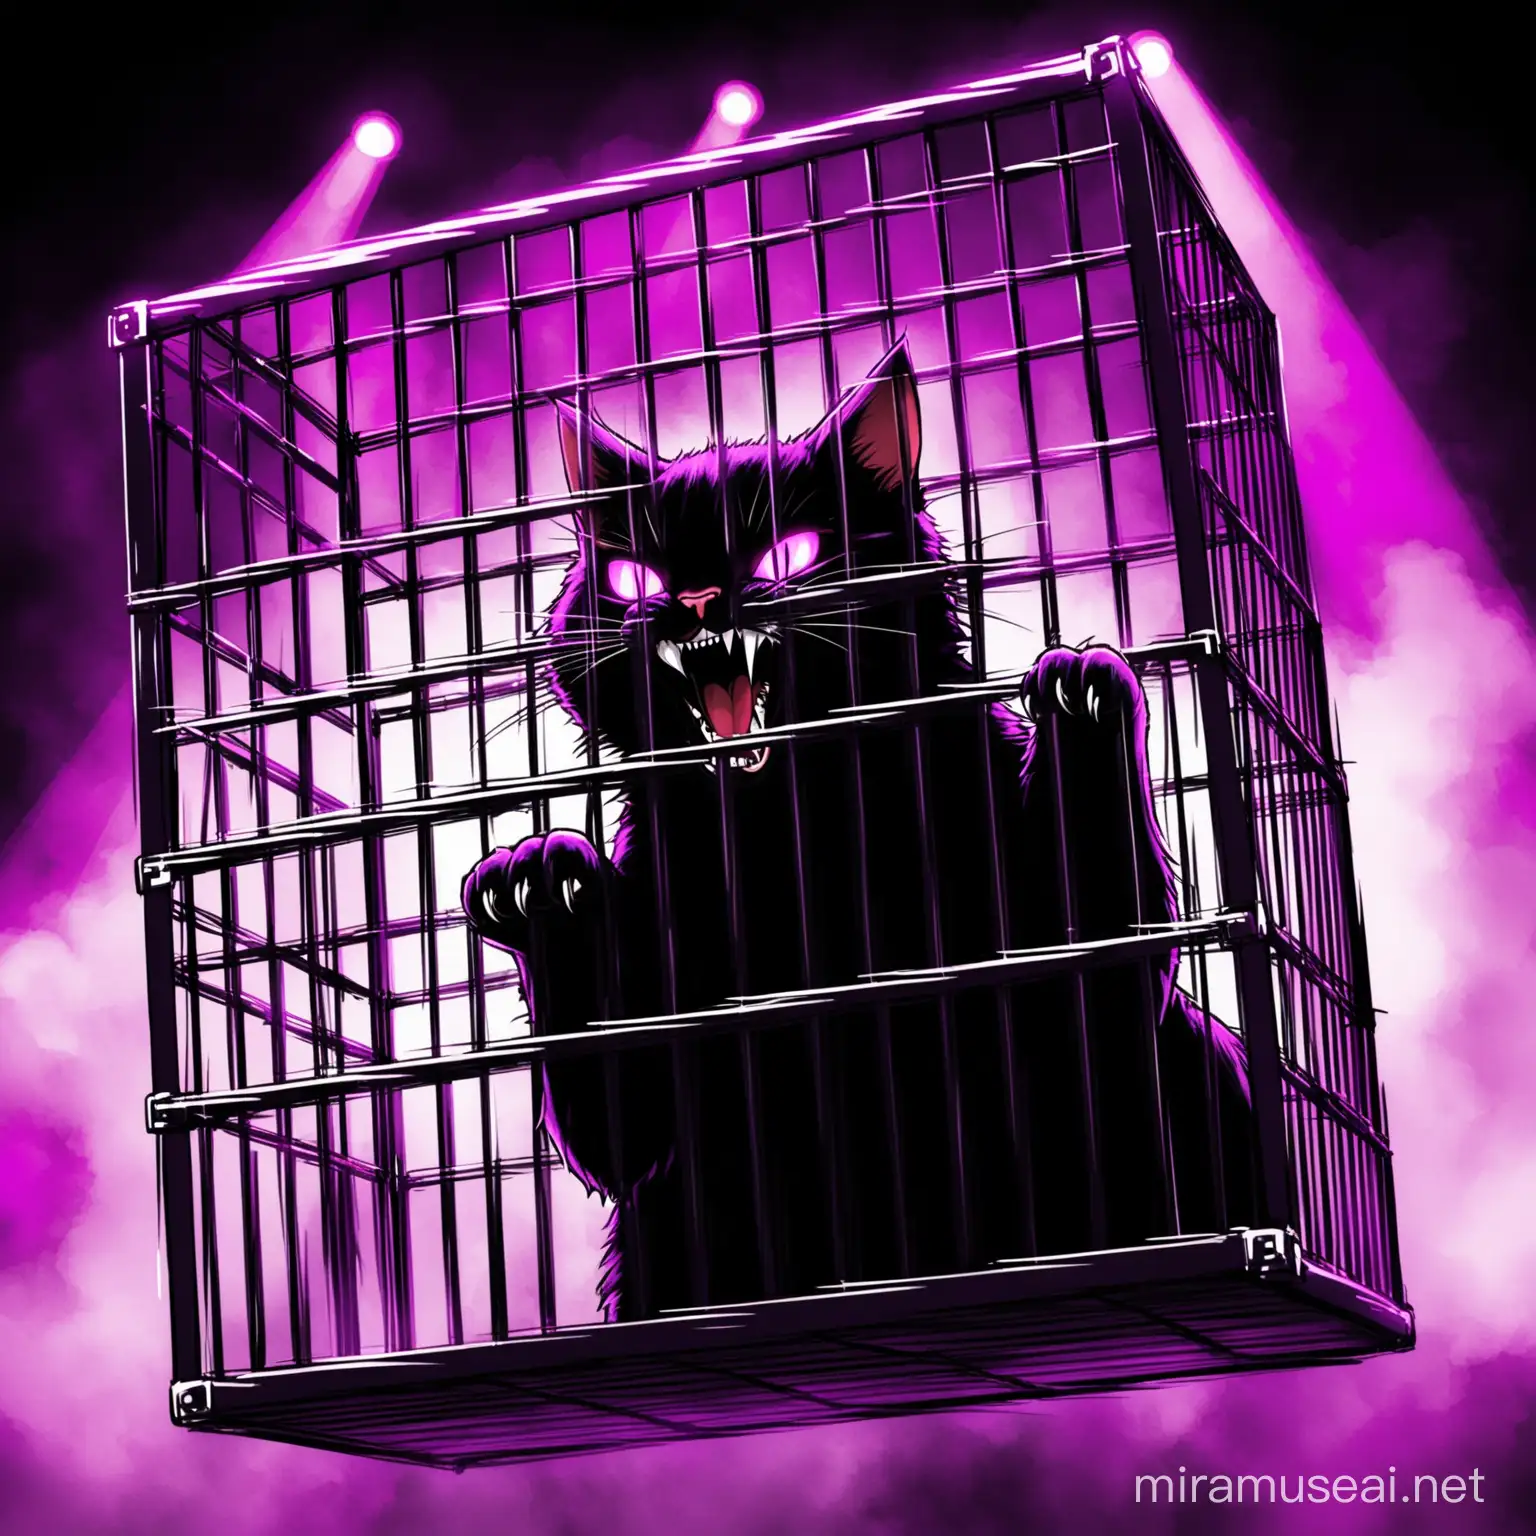 Demonic Cat Trapped in Cage amidst Dubstep Concert